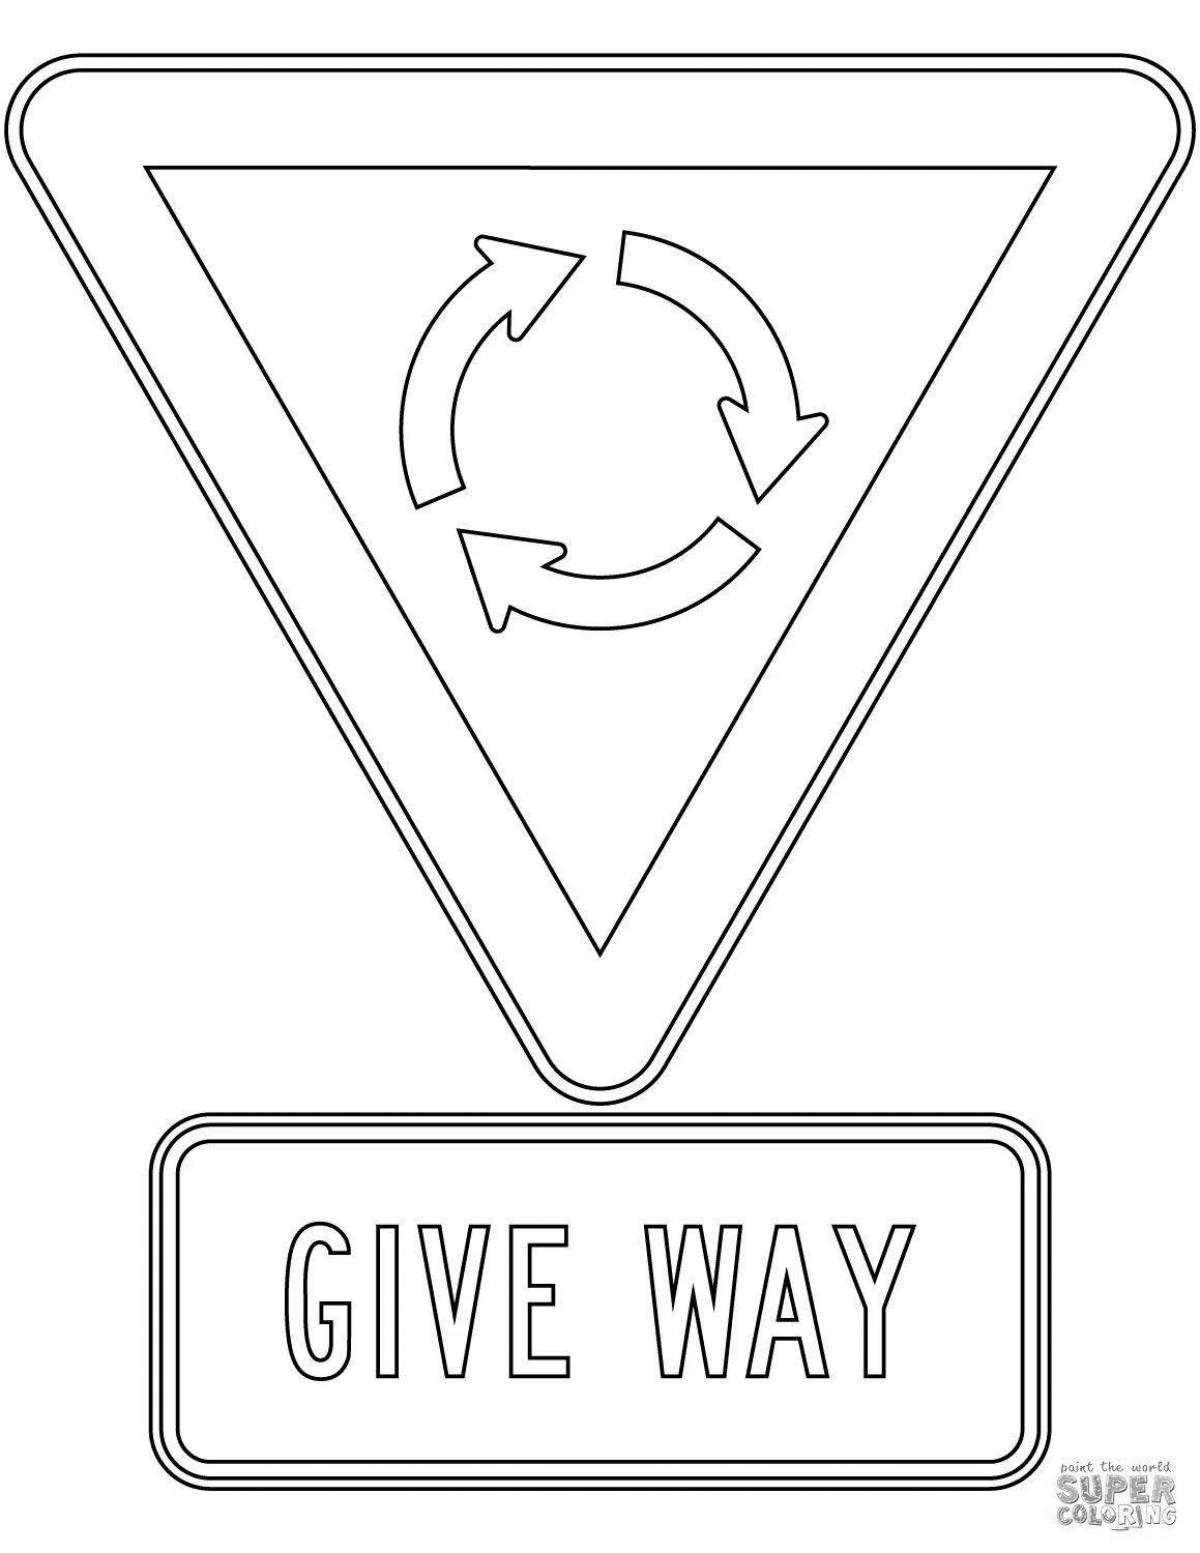 Give way sign coloring page